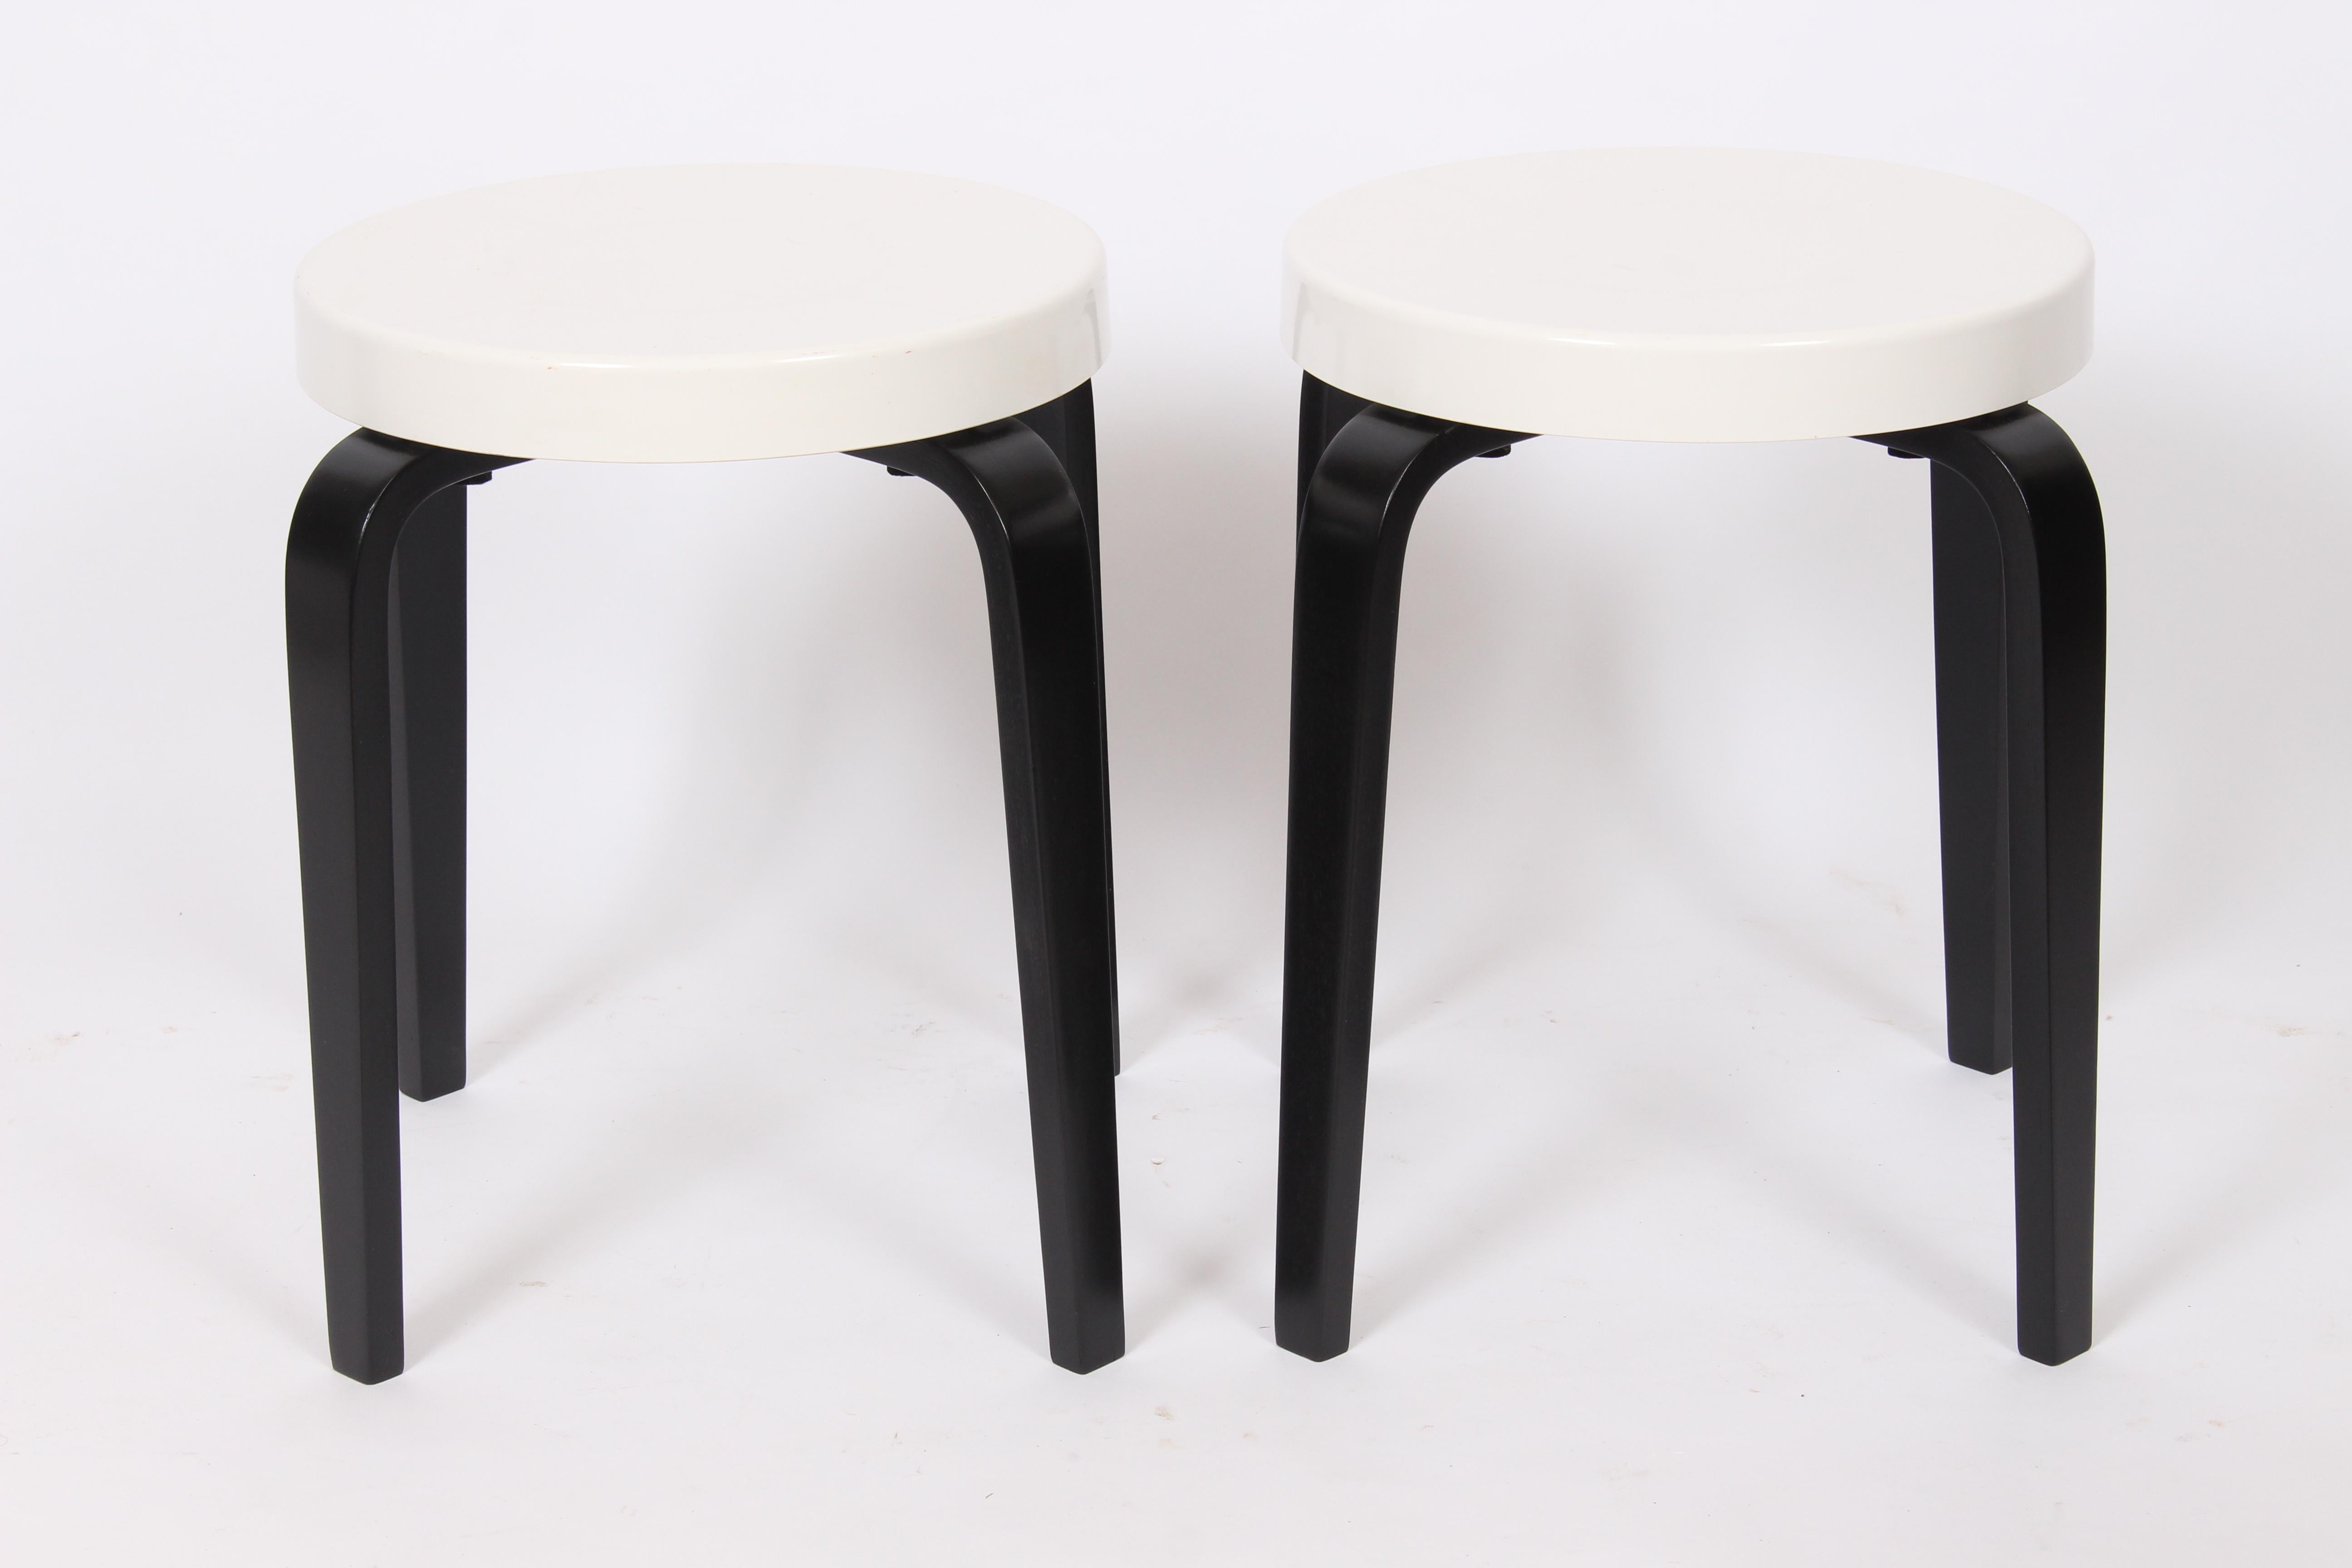 Art Deco Pair of Thonet White and Black Bakelite Stacking Stools, 1930s For Sale